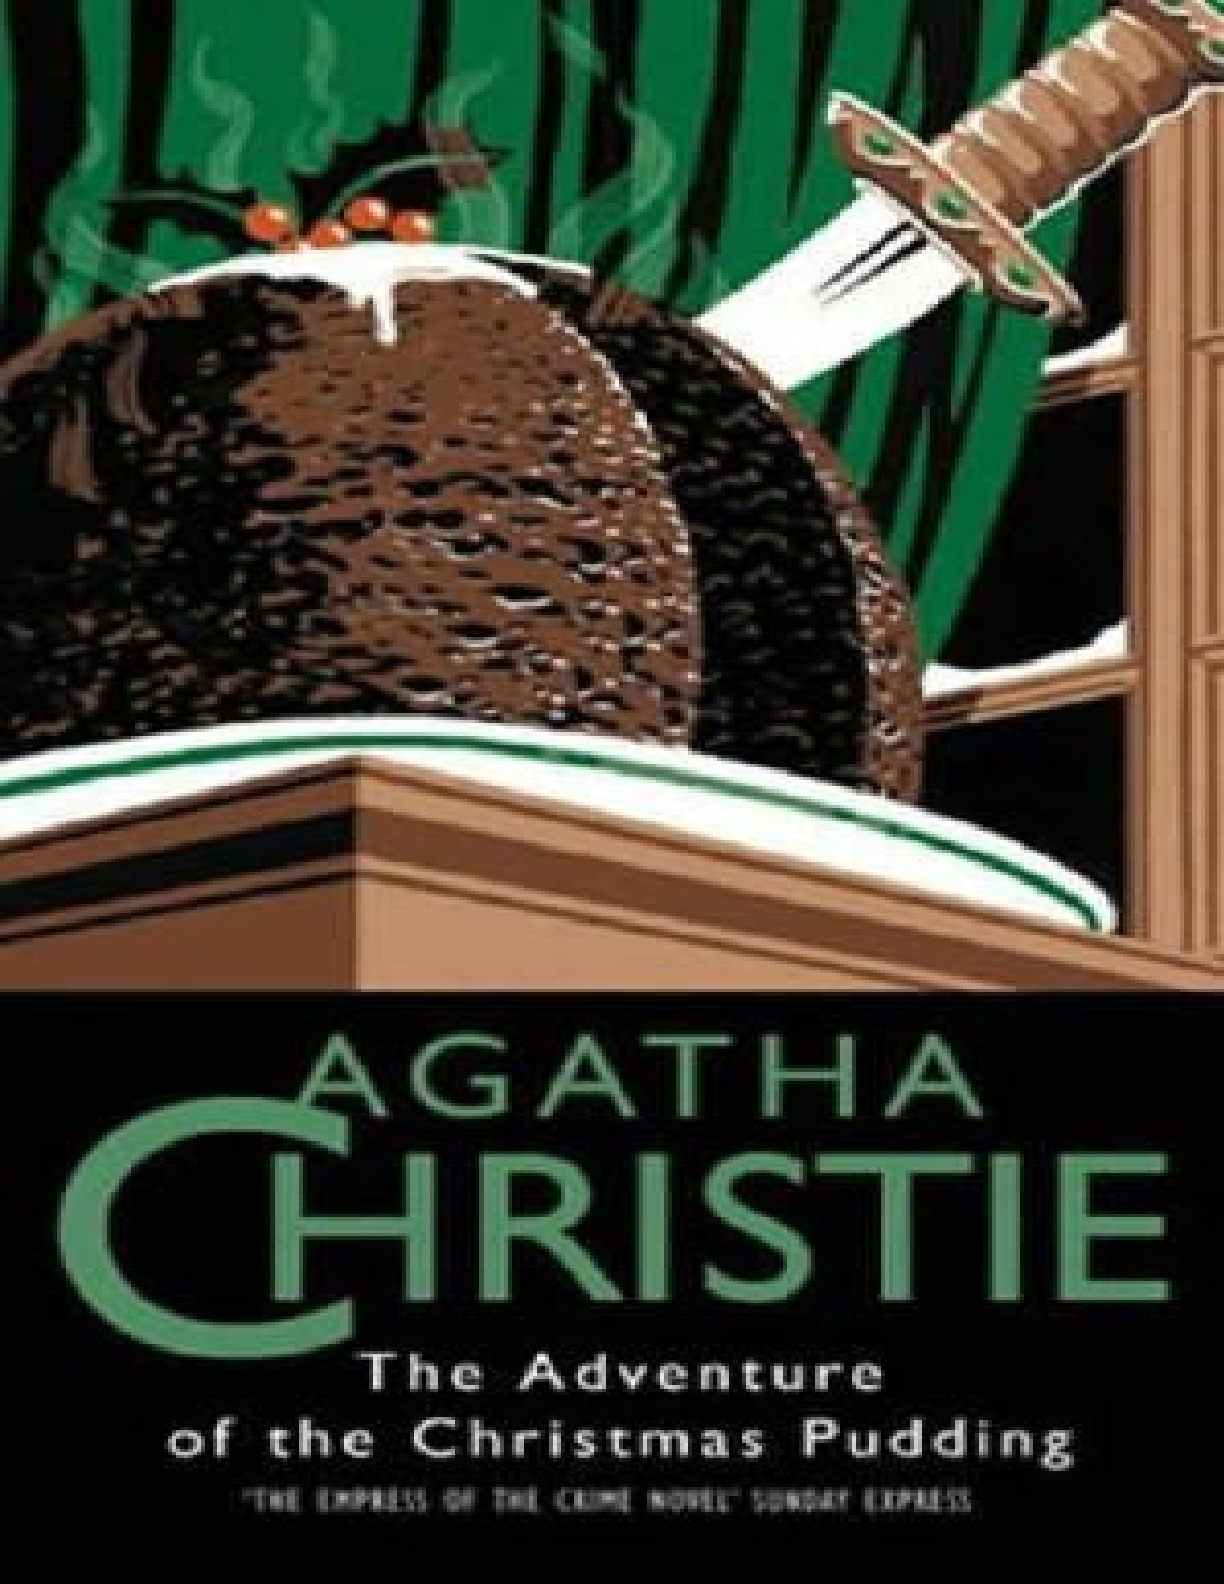 Adventure of the Christmas Pudding and other stories – Agatha Christie